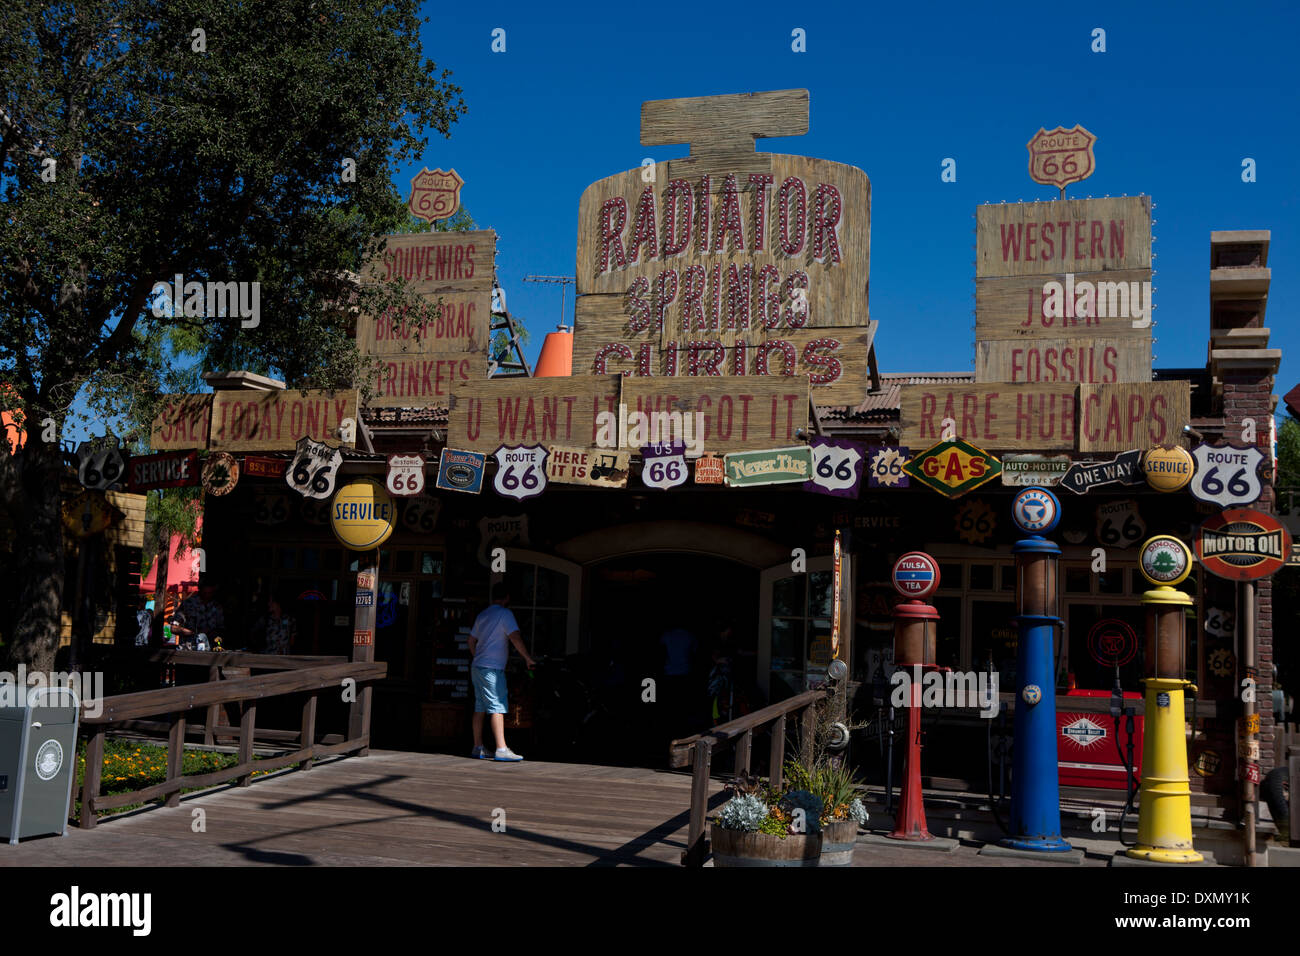 Route 66 themed souvenir shop, Cars section, Disneyland, Anaheim, California, United States of America Stock Photo